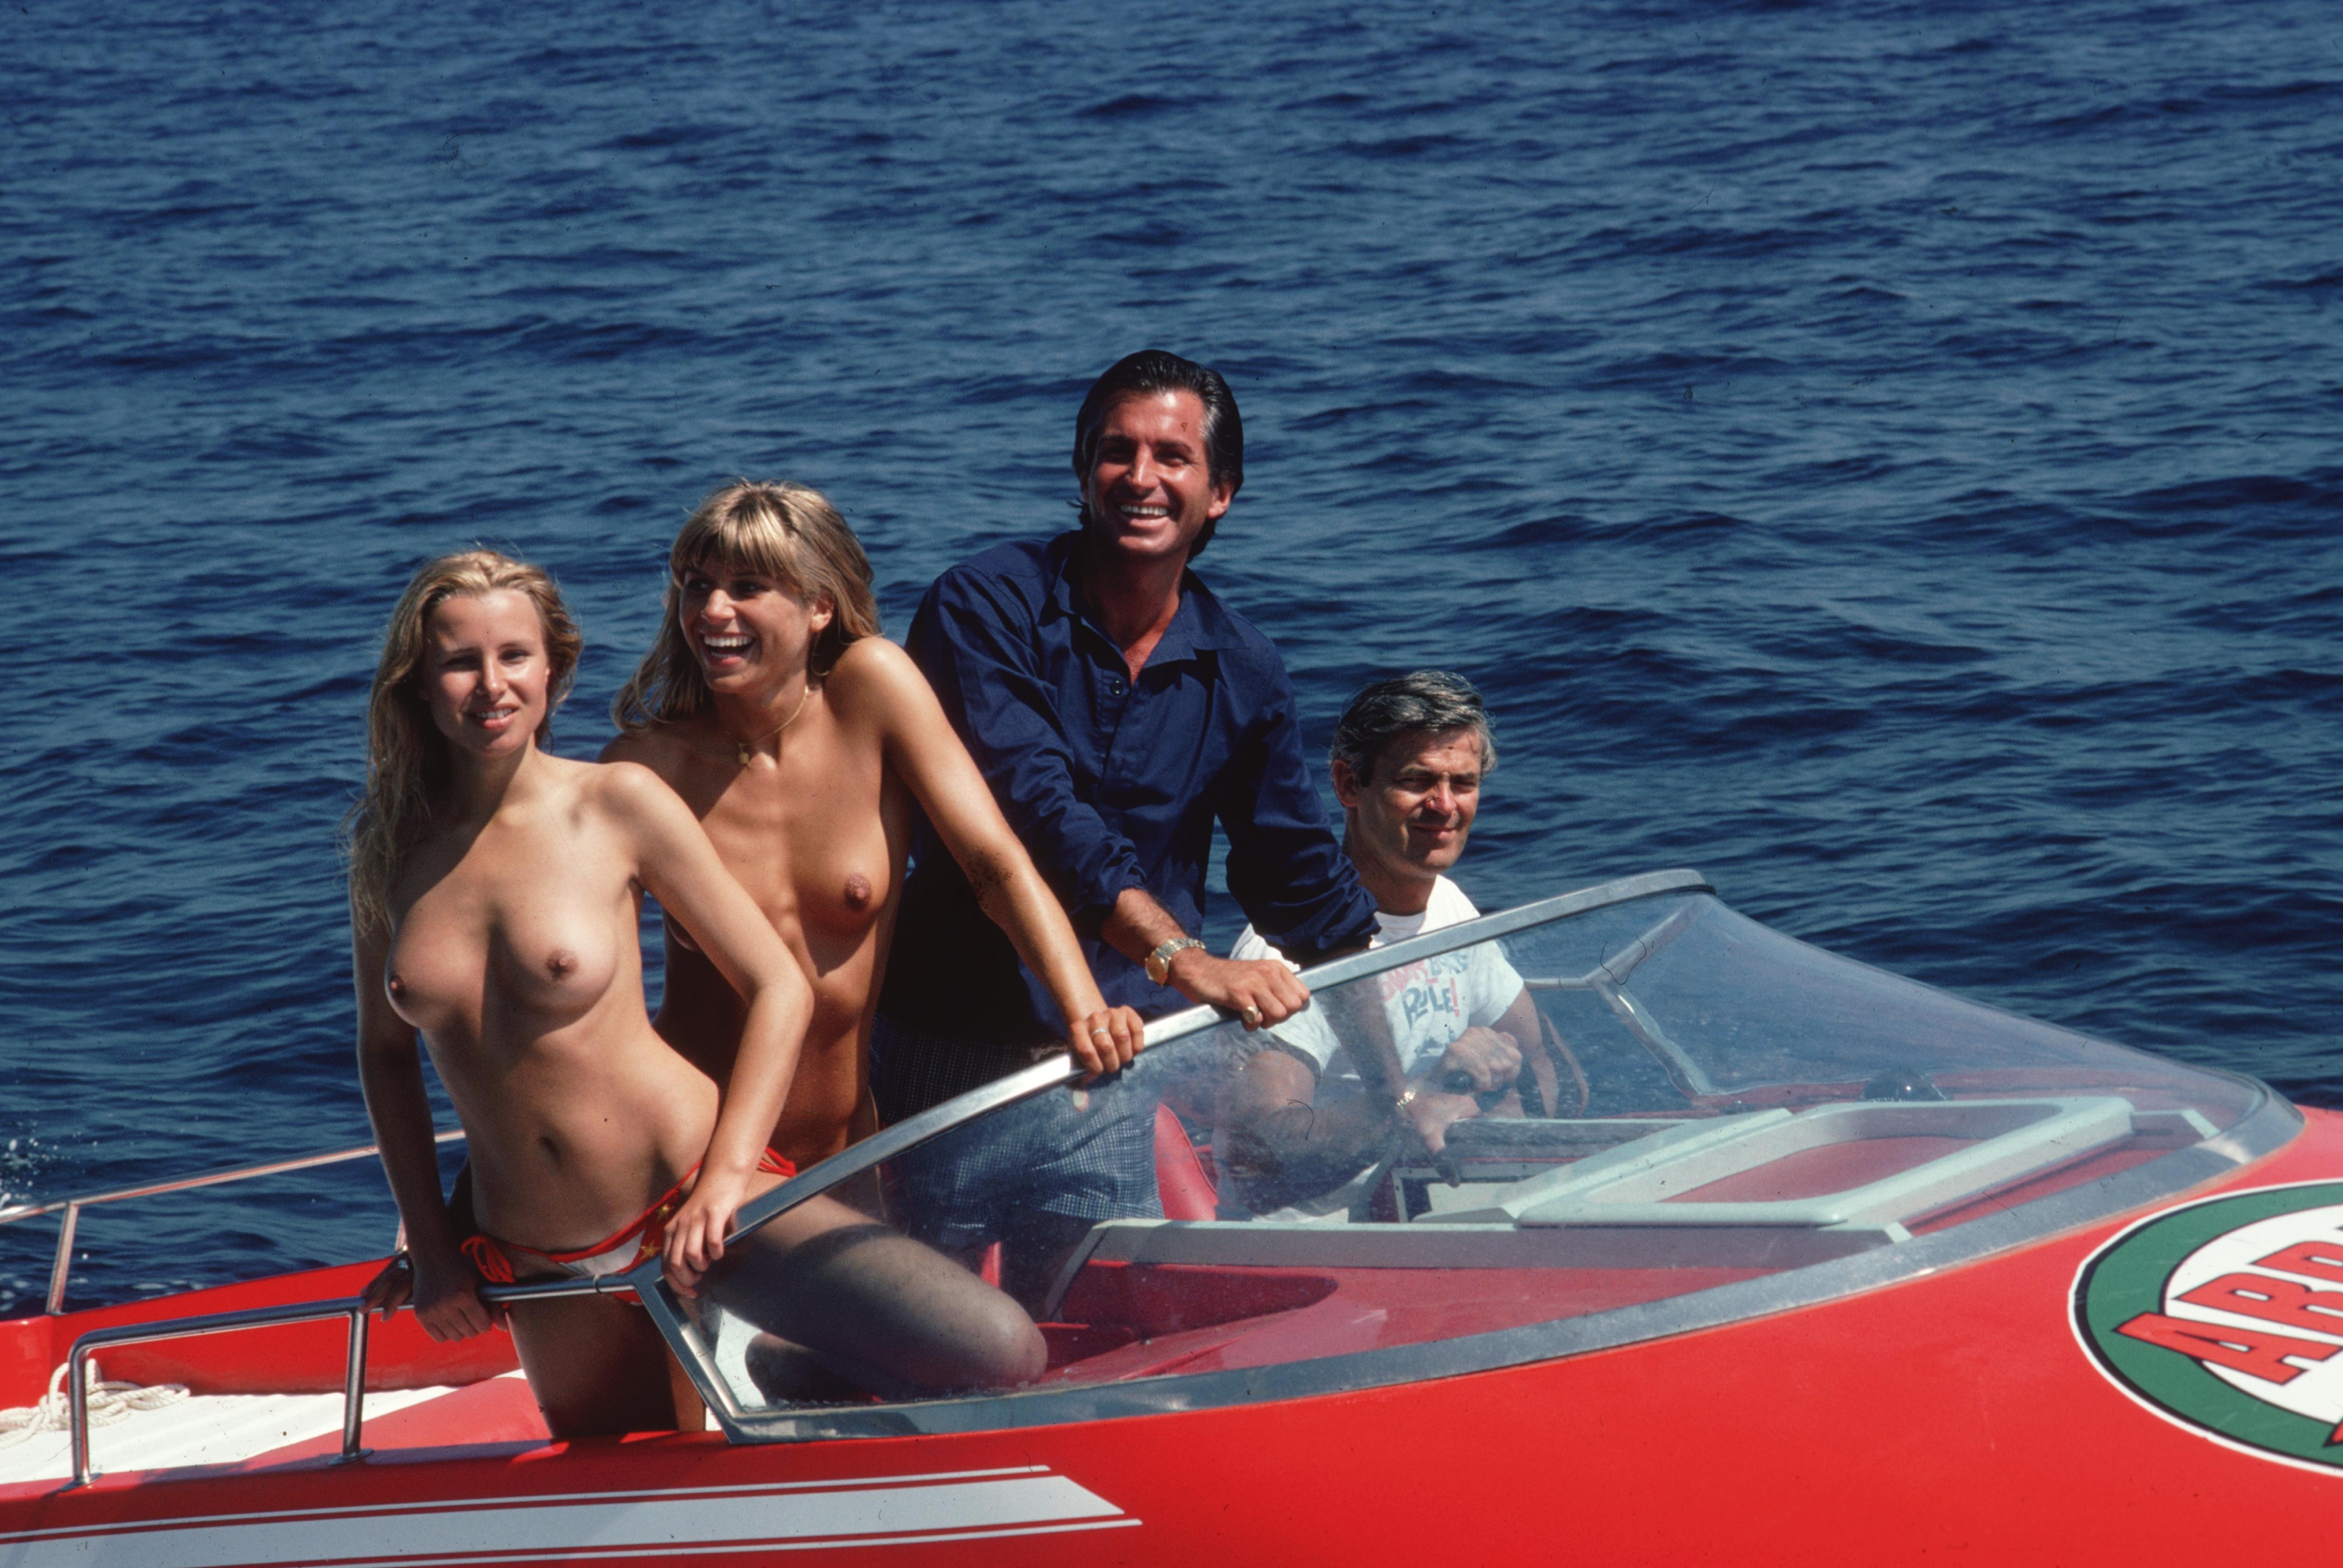 'The High Life' 1977 Slim Aarons Limited Estate Edition Print 

Actor George Hamilton (in blue) takes off in a speedboat with friends during a stay in St Tropez, August 1977. 
(Photo by Slim Aarons/Getty Images)

Produced from the original